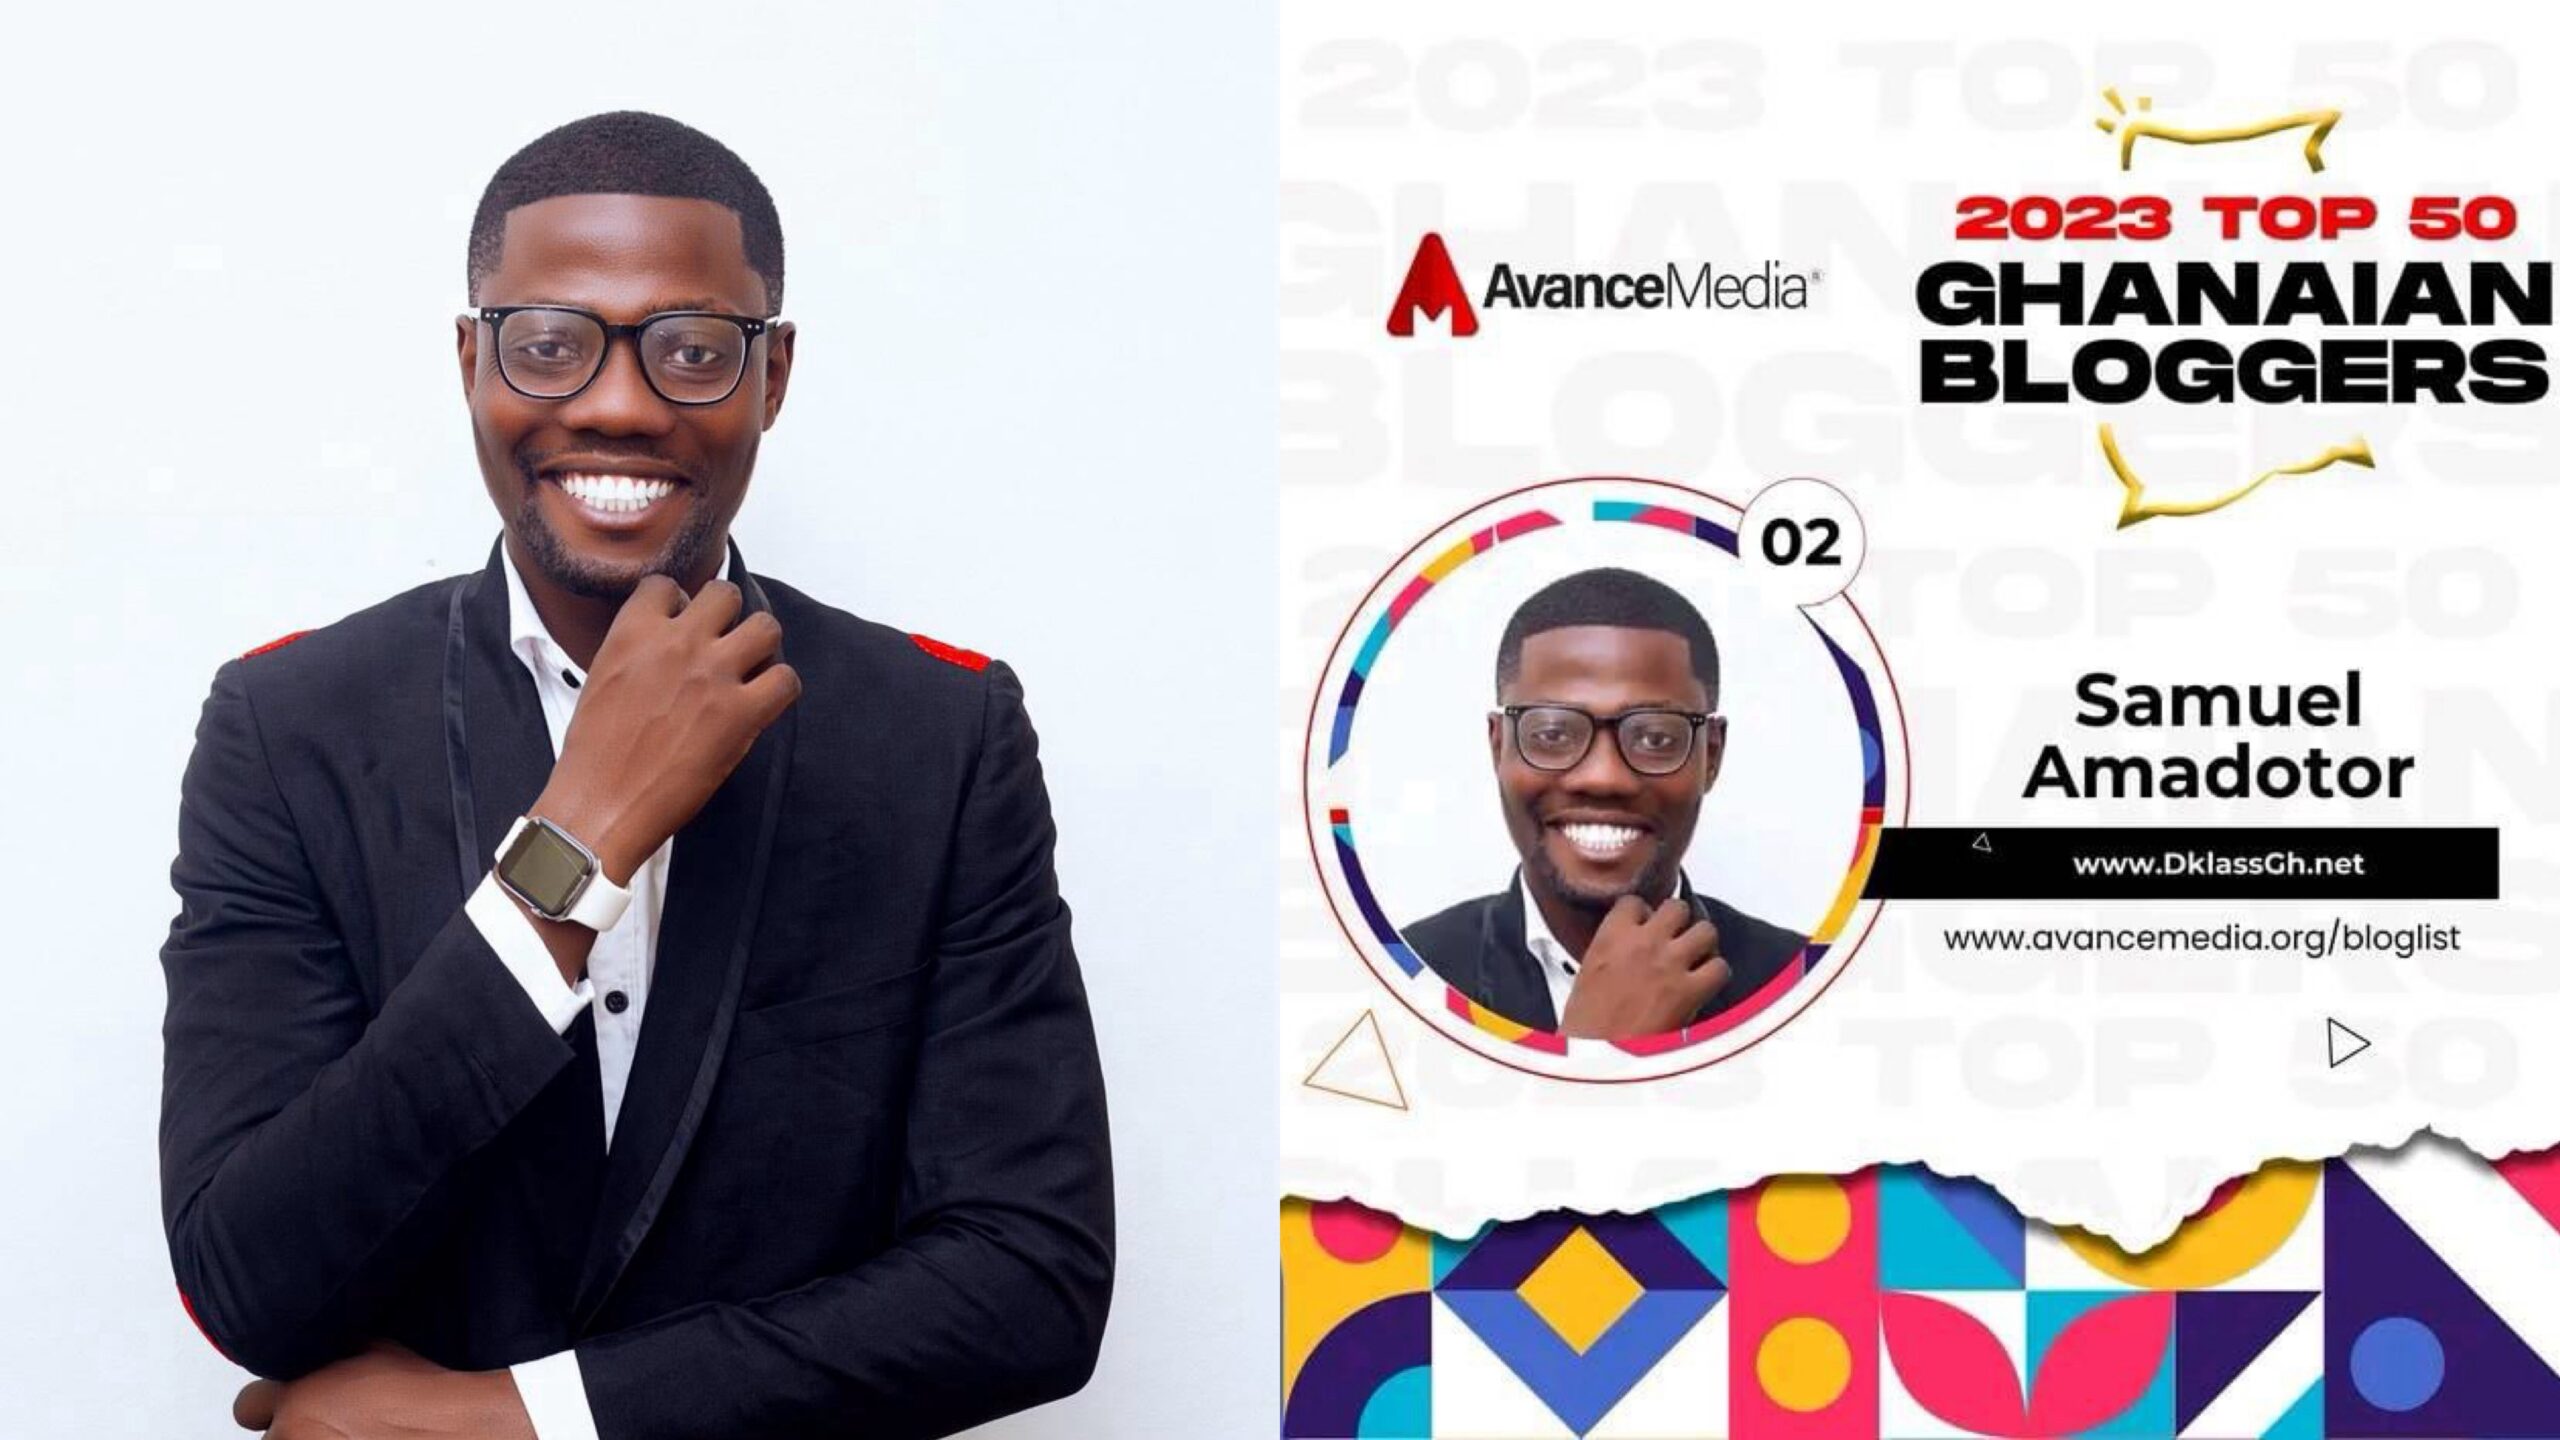 D.Klass GH adjudged the Number 2 Blogger of the Year at Top 50 Ghanaian Bloggers 2023